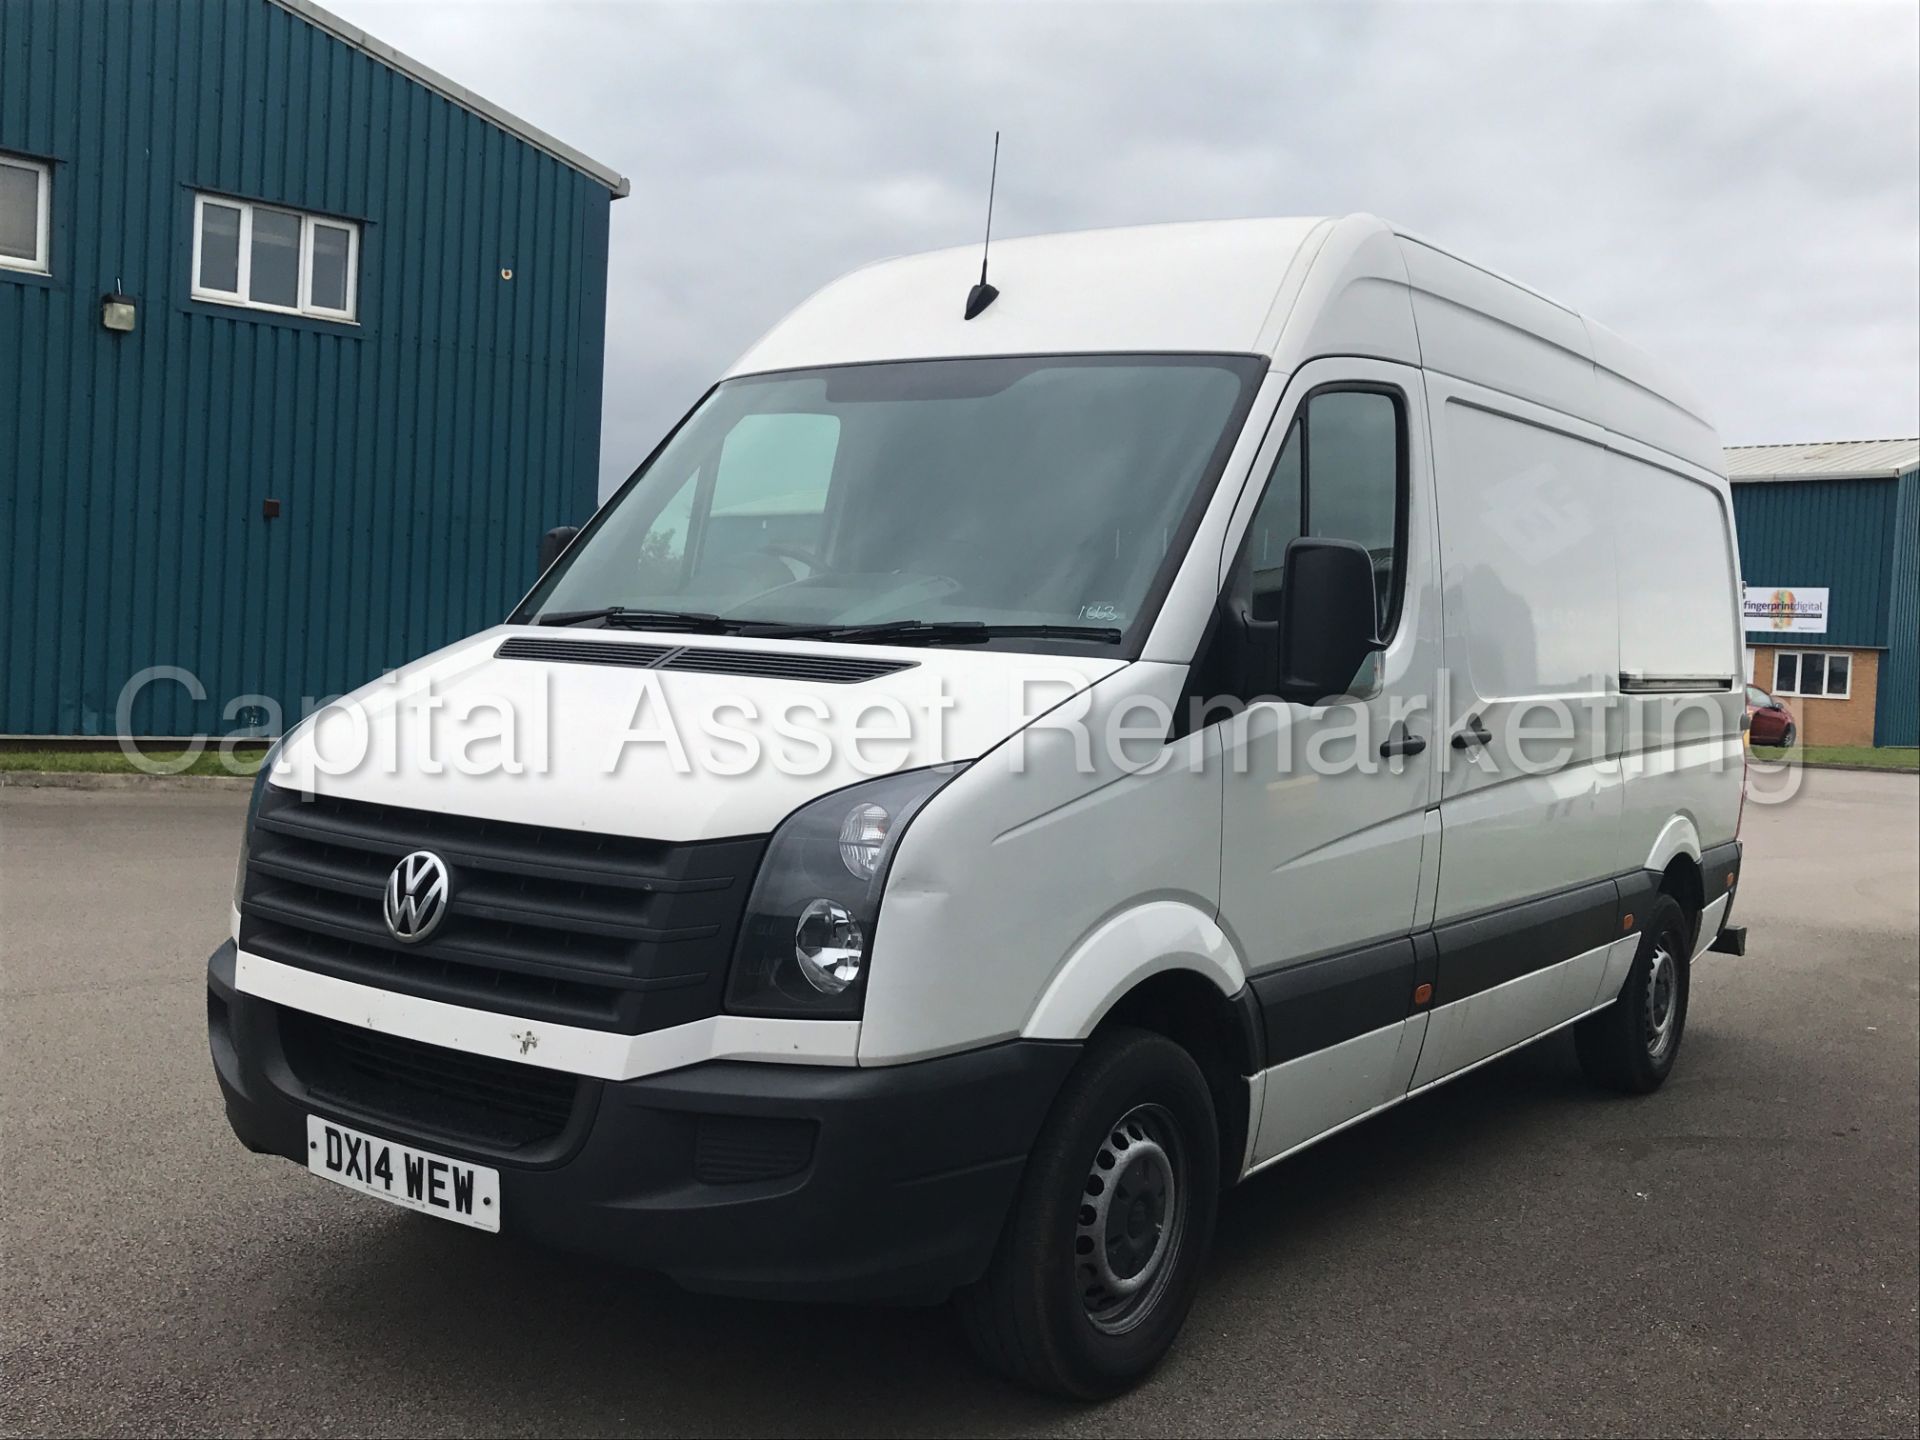 VOLKSWAGEN CRAFTER CR35 'MWB HI-ROOF' (2014) '2.0 TDI - 109 PS - 6 SPEED' *1 COMPANY OWNER FROM NEW* - Image 2 of 19